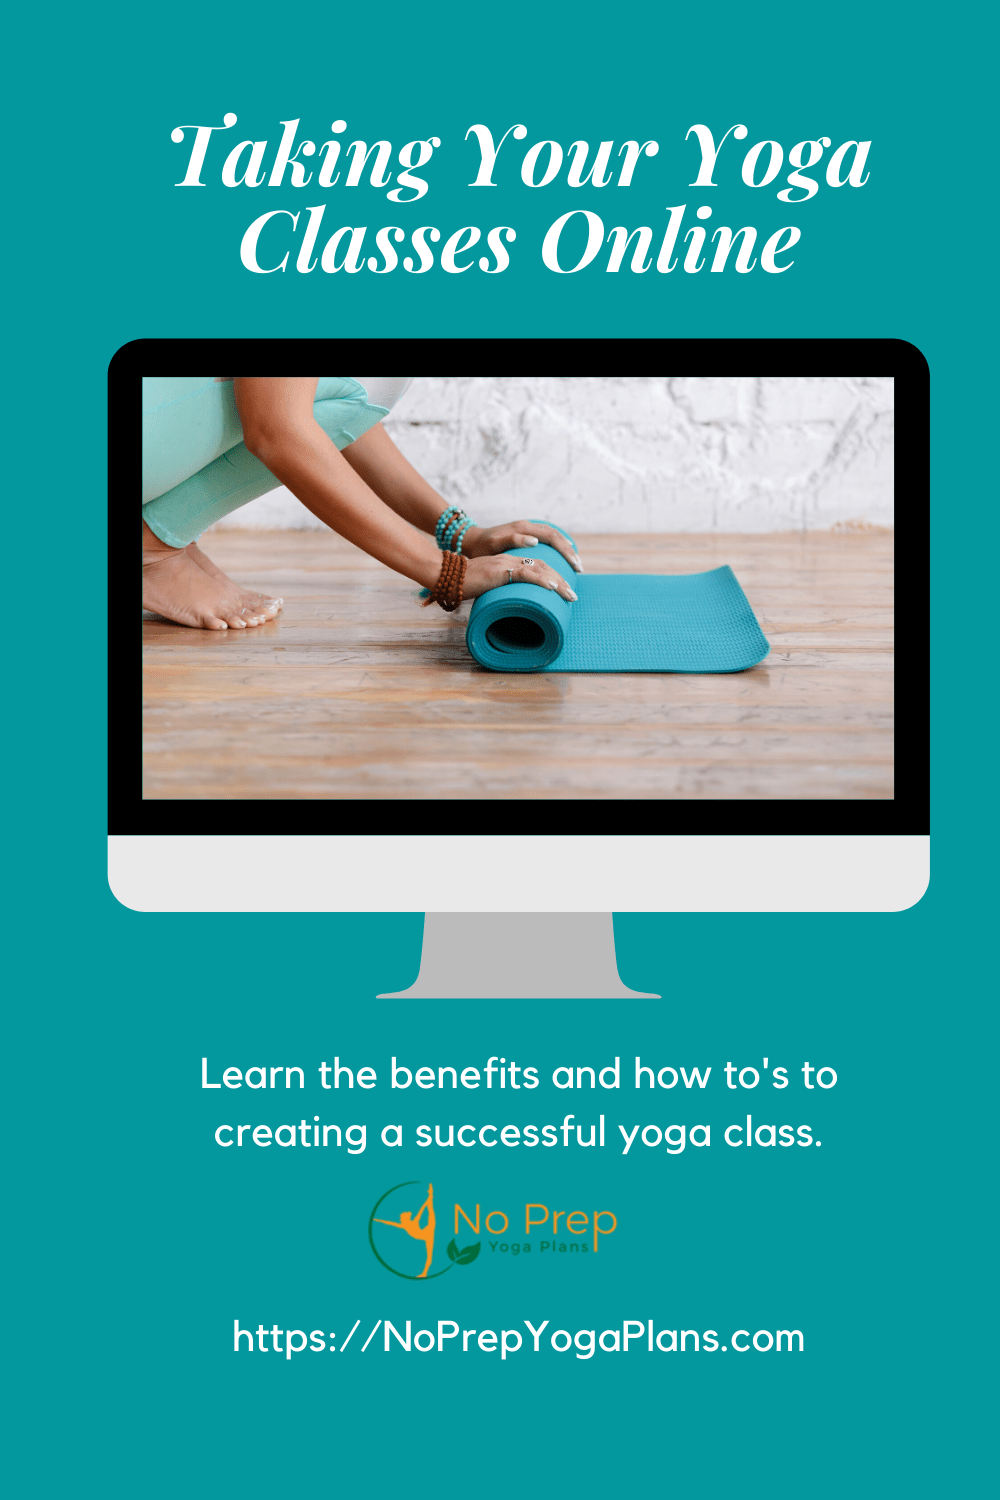 How to Take Your Yoga Classes Online